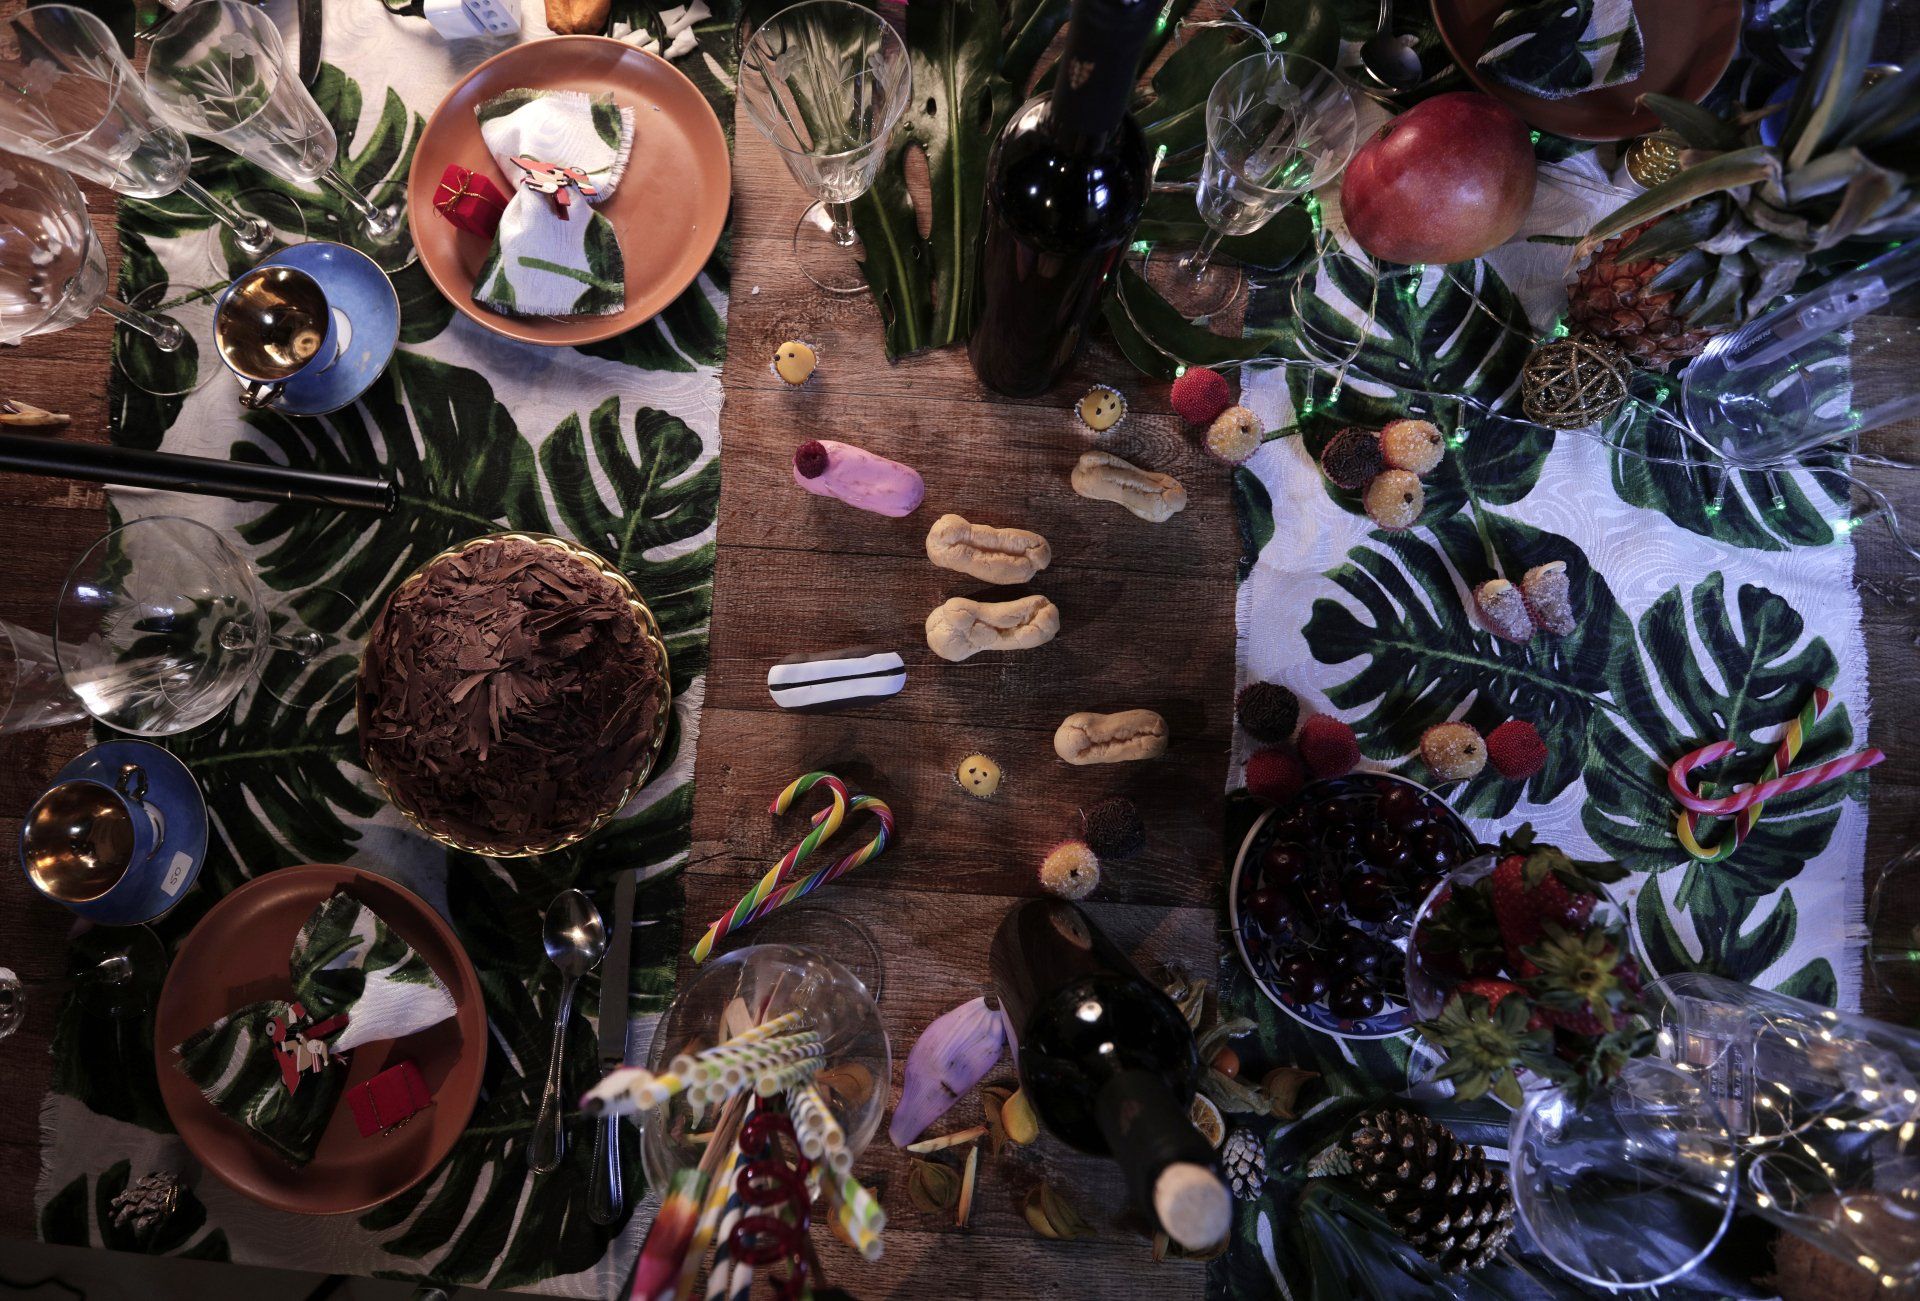 A wooden table with a tropical Christmas setting is set, in the middle six eclair treats